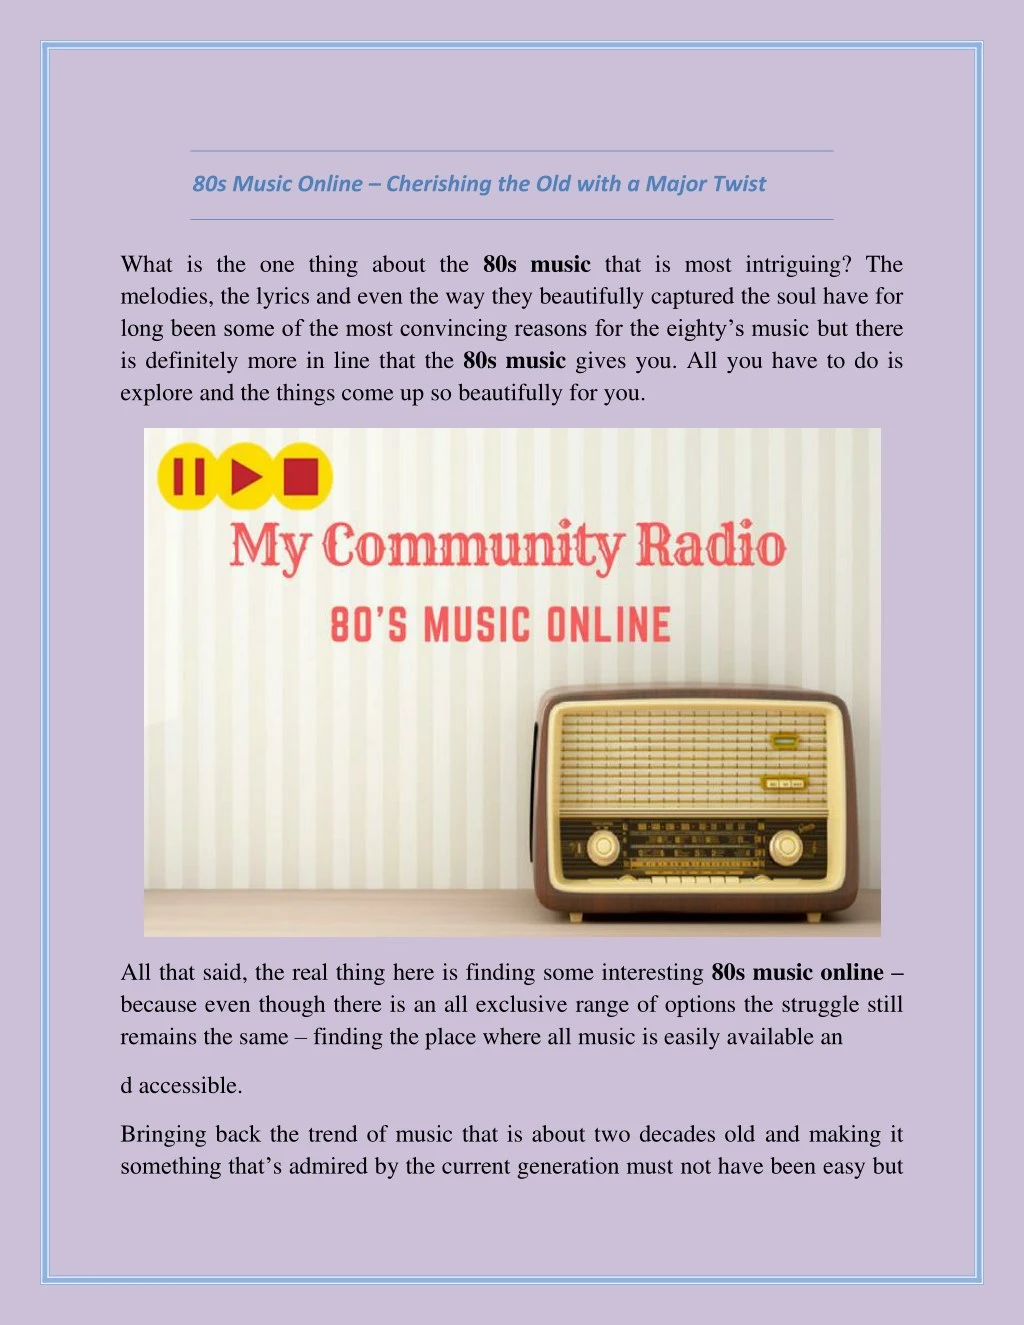 80s music online cherishing the old with a major